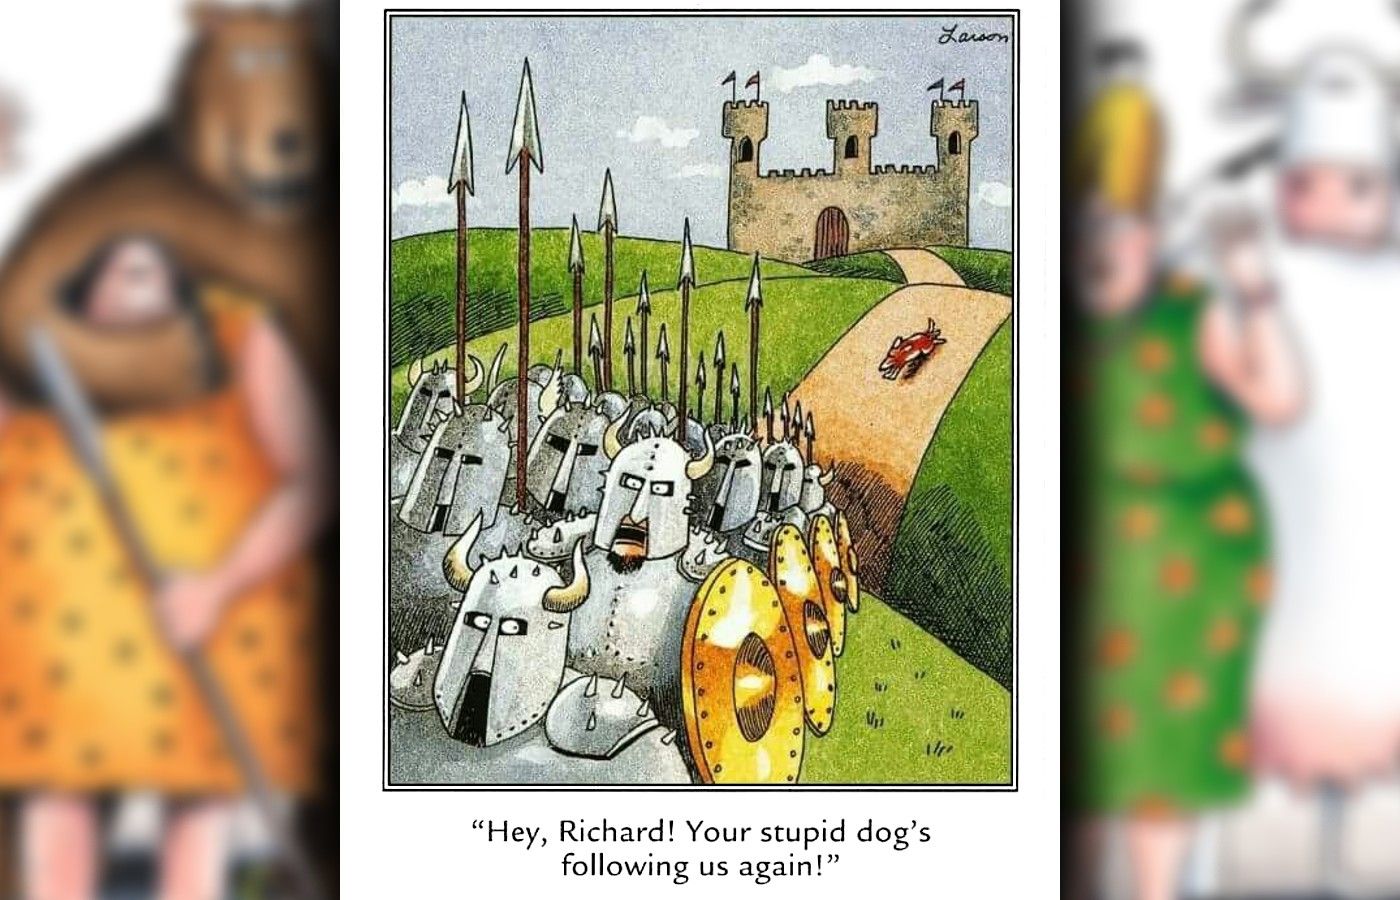 far side comic where a knight is embarassed by his dog following him